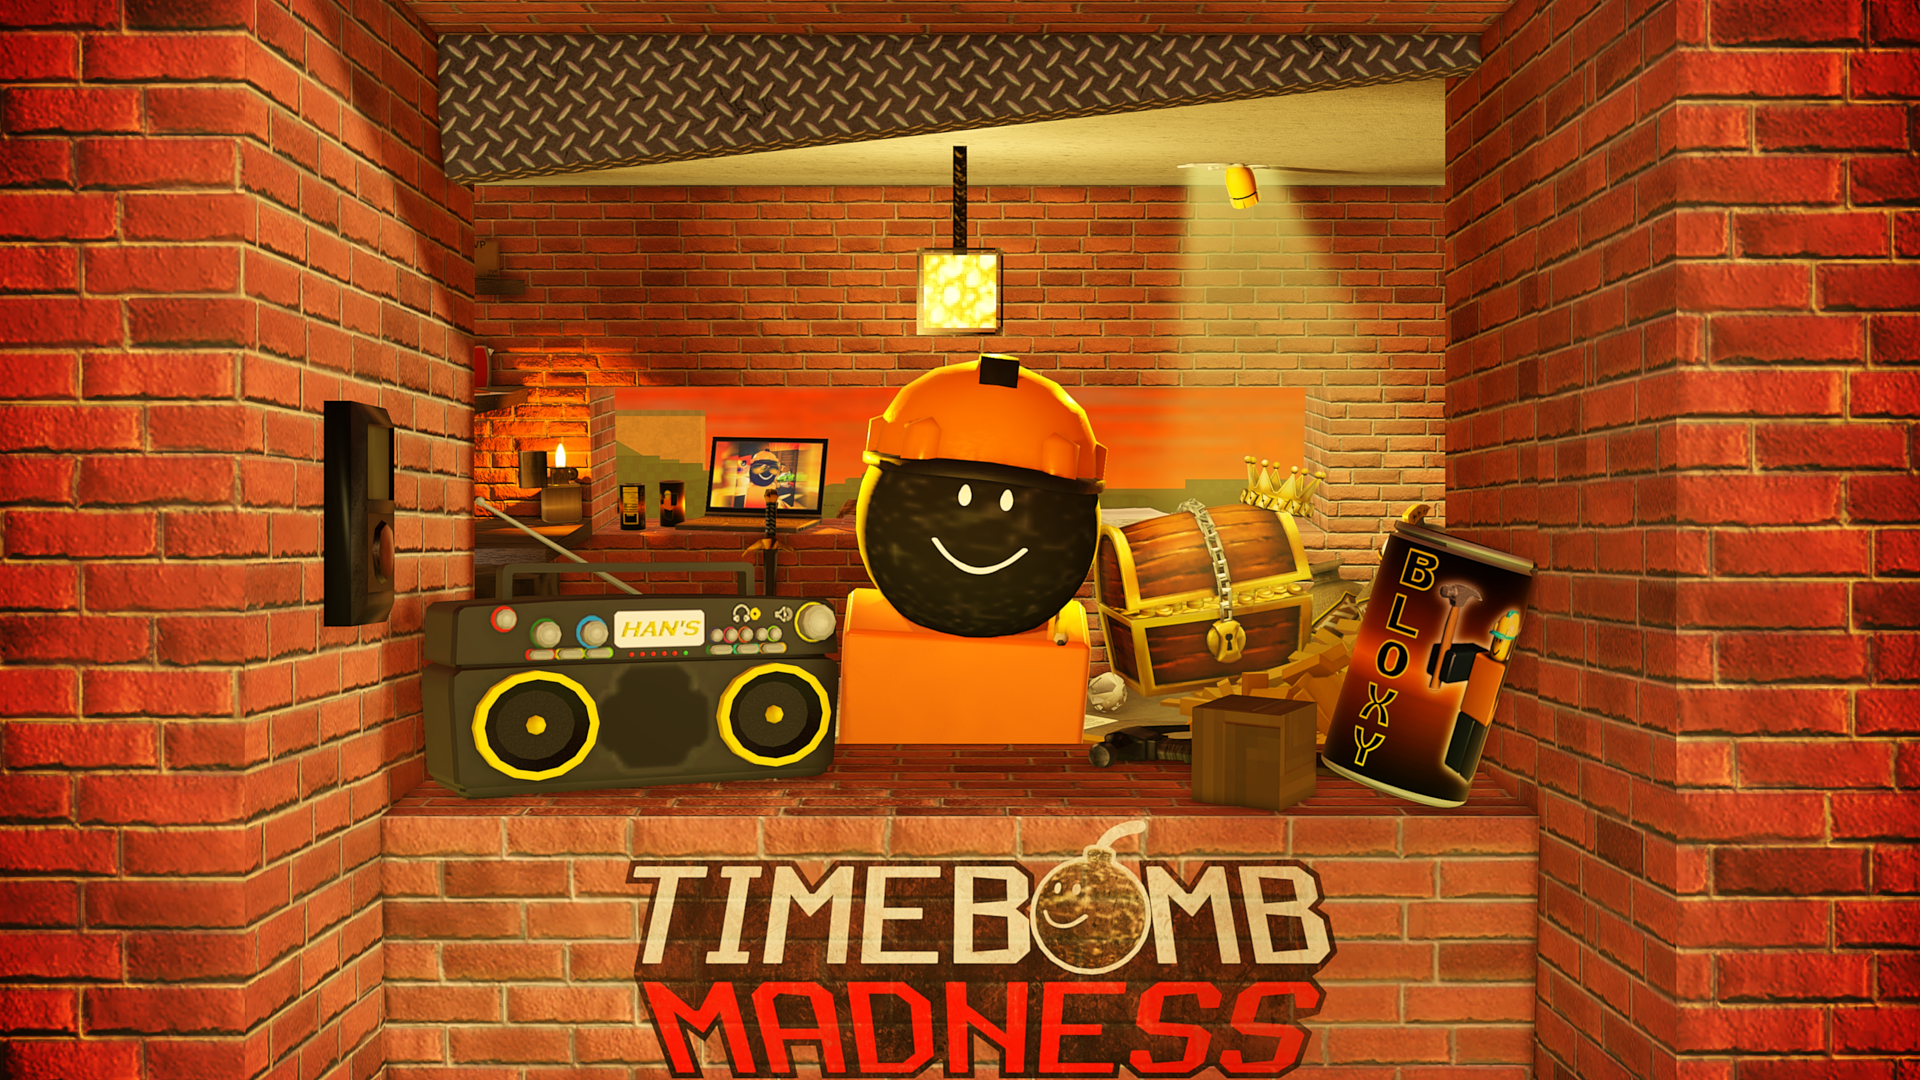 General 1920x1080 timebomb madness warm colors Roblox spray wall bricks video game art smiley video games treasure chest boombox bombs CGI